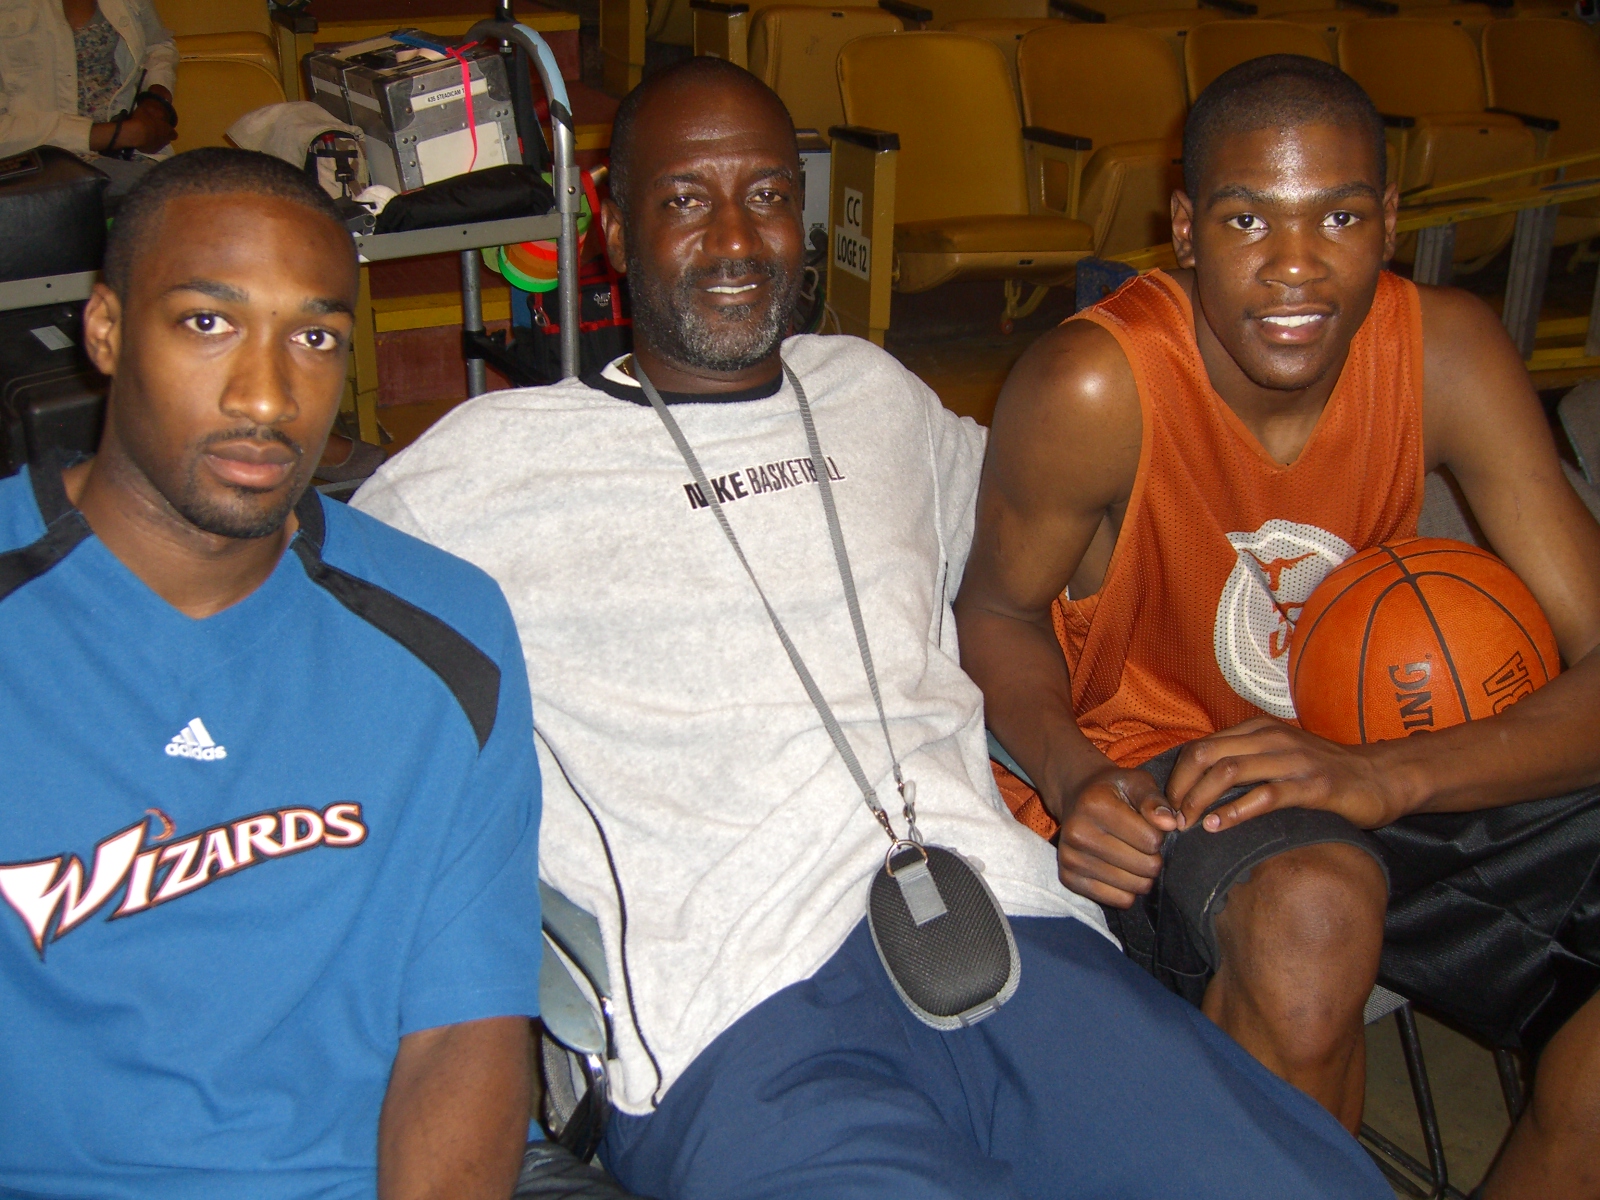 On the set of The EA Sports Commercial, Kevin Durant of the Super Sonics and All-Star Gilbert Arenas of The Wizards relax with Basketball Coordinator Nigel Miguel. This was Kevin's first commercial, one of many to come.